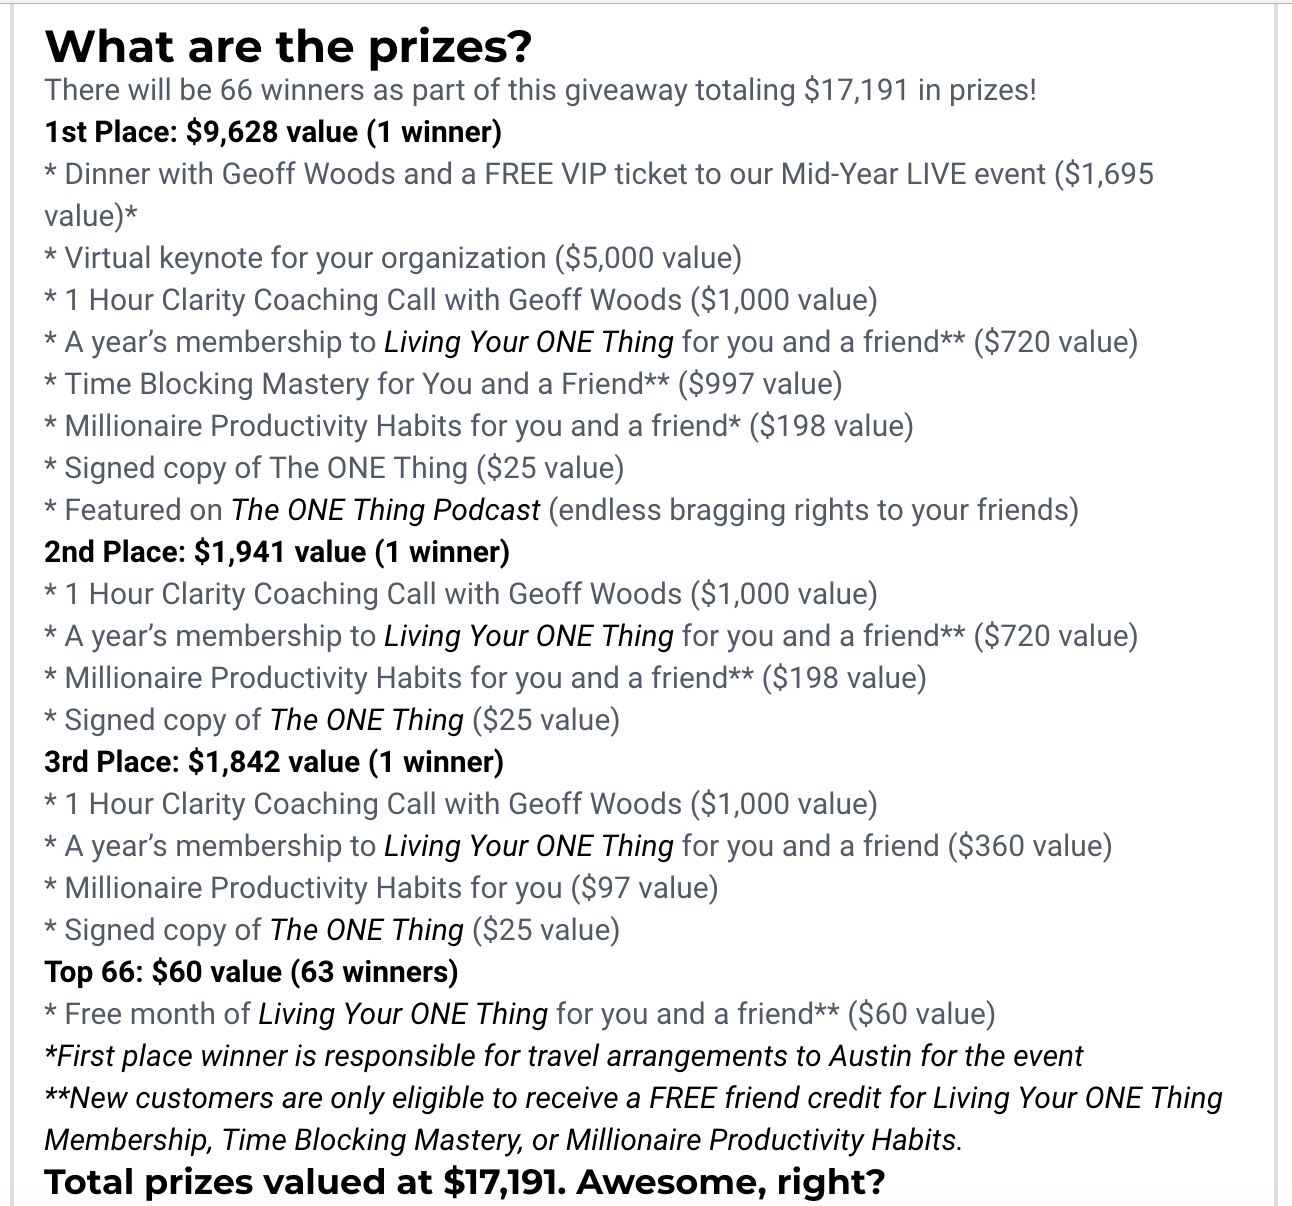 Screenshot showing prizes for a sweepstakes